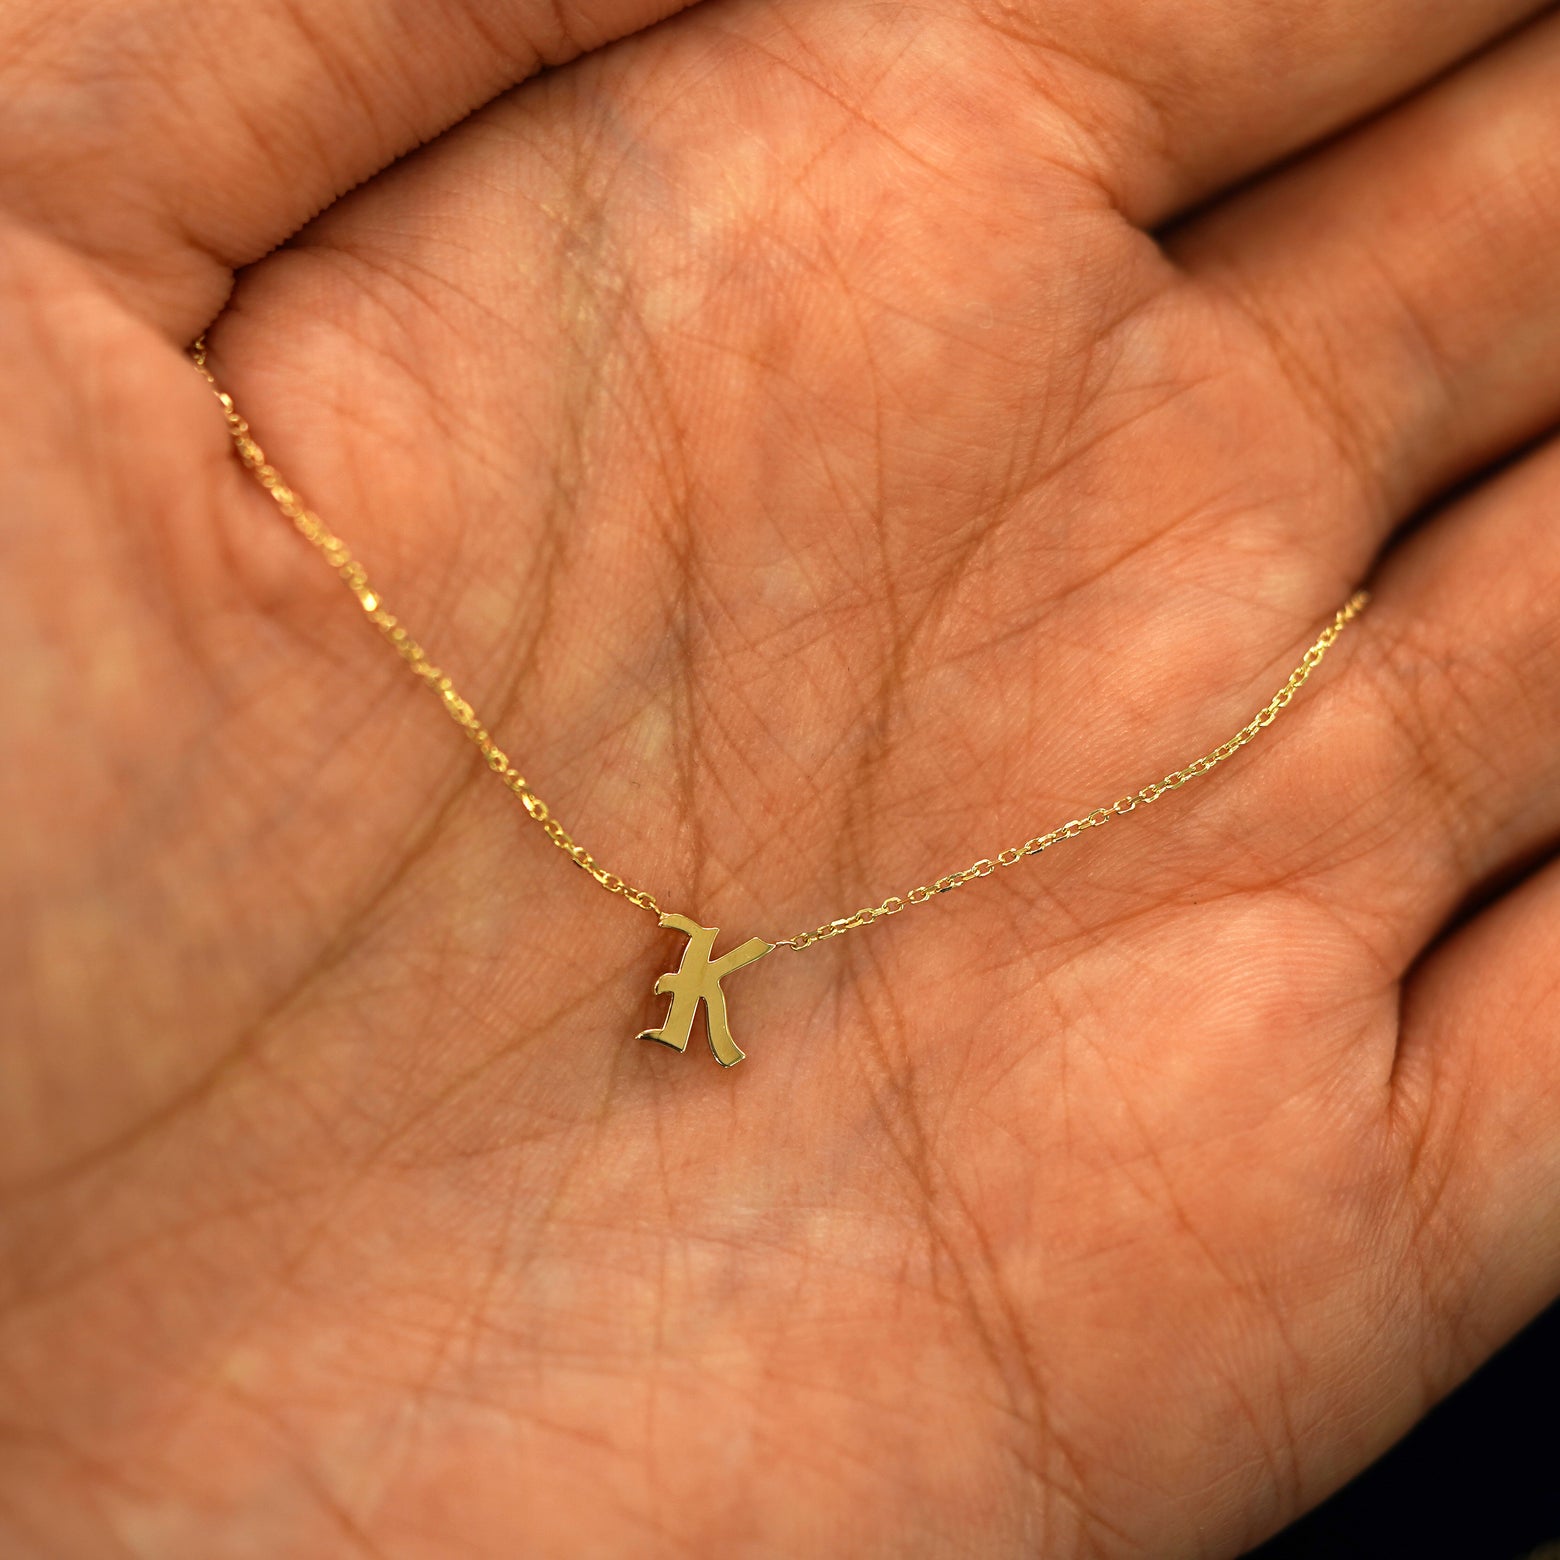 A solid 14k gold Initial Necklace with the letter K draped resting in a models palm